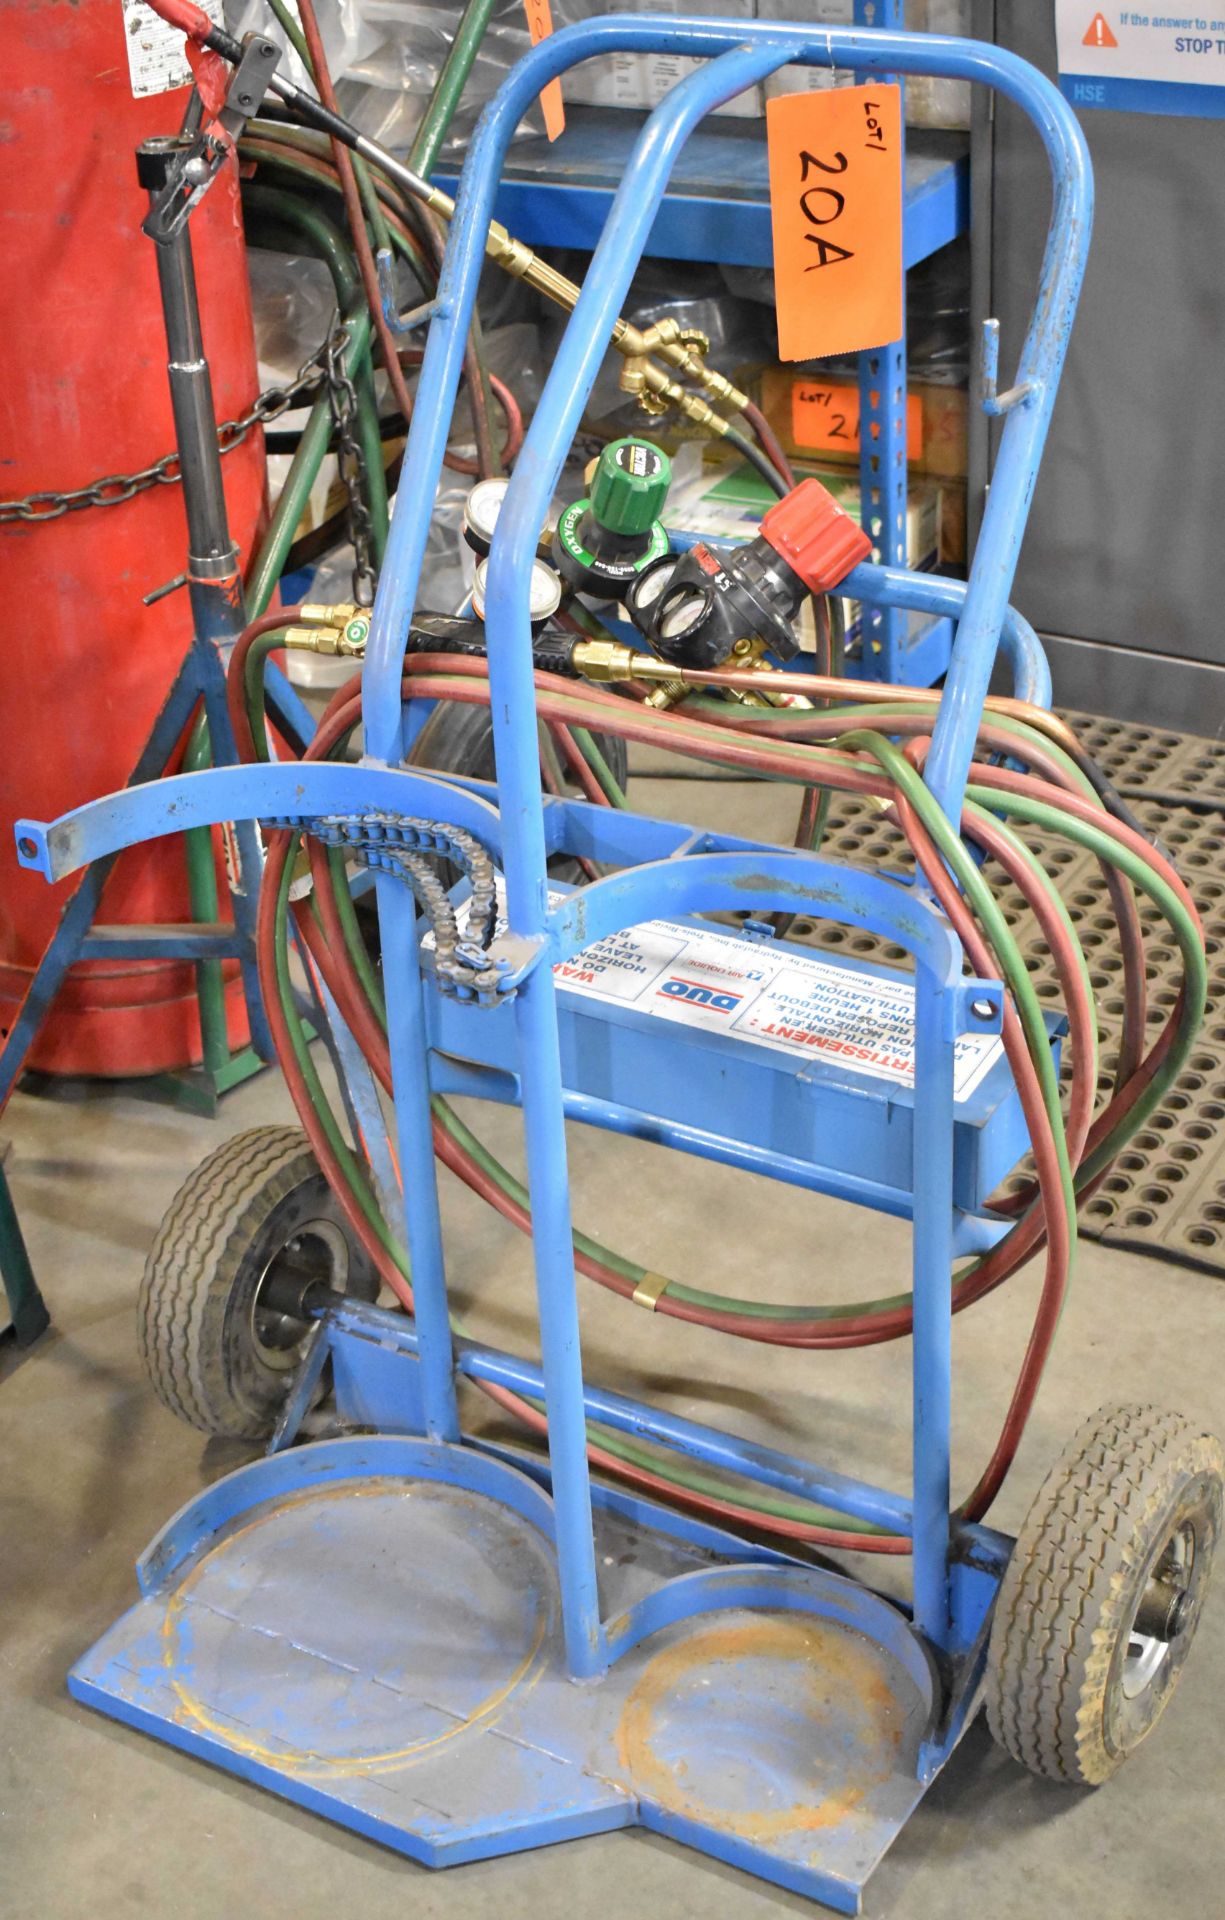 LOT/ OXY-ACETYLENE TANK CADDY WITH TORCH, GAUGES & HOSE [RIGGING FEES FOR LOT #20 A - $25 USD PLUS